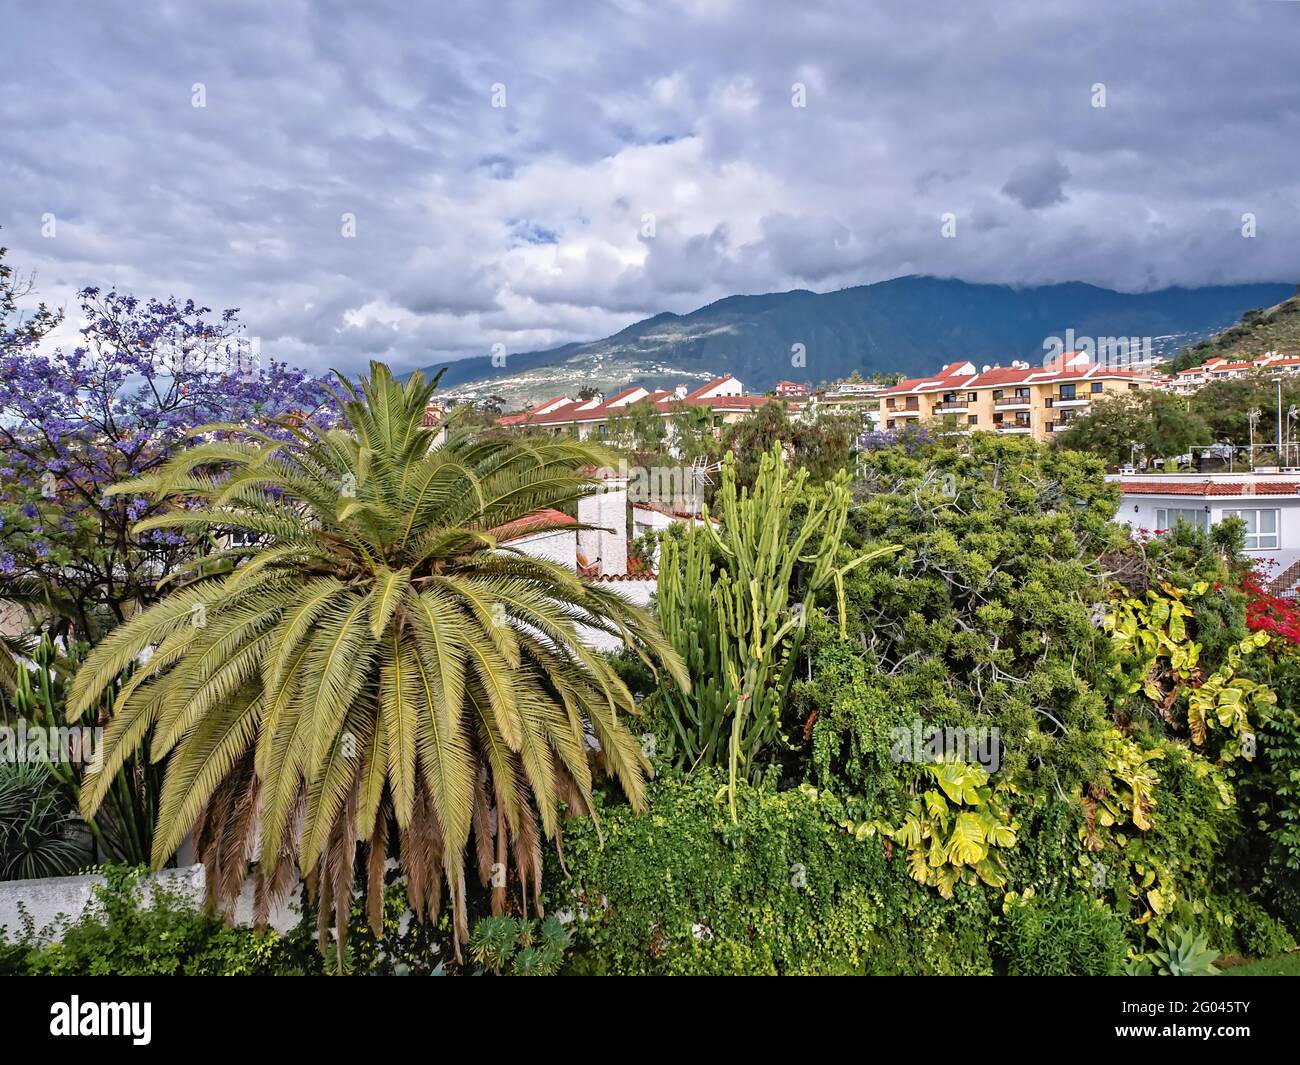 Puerto de la Cruz on the Canary Island of Tenerife, view over the green district of 'San Antonio' with a view towards Teide, which is covered by a thi Stock Photo